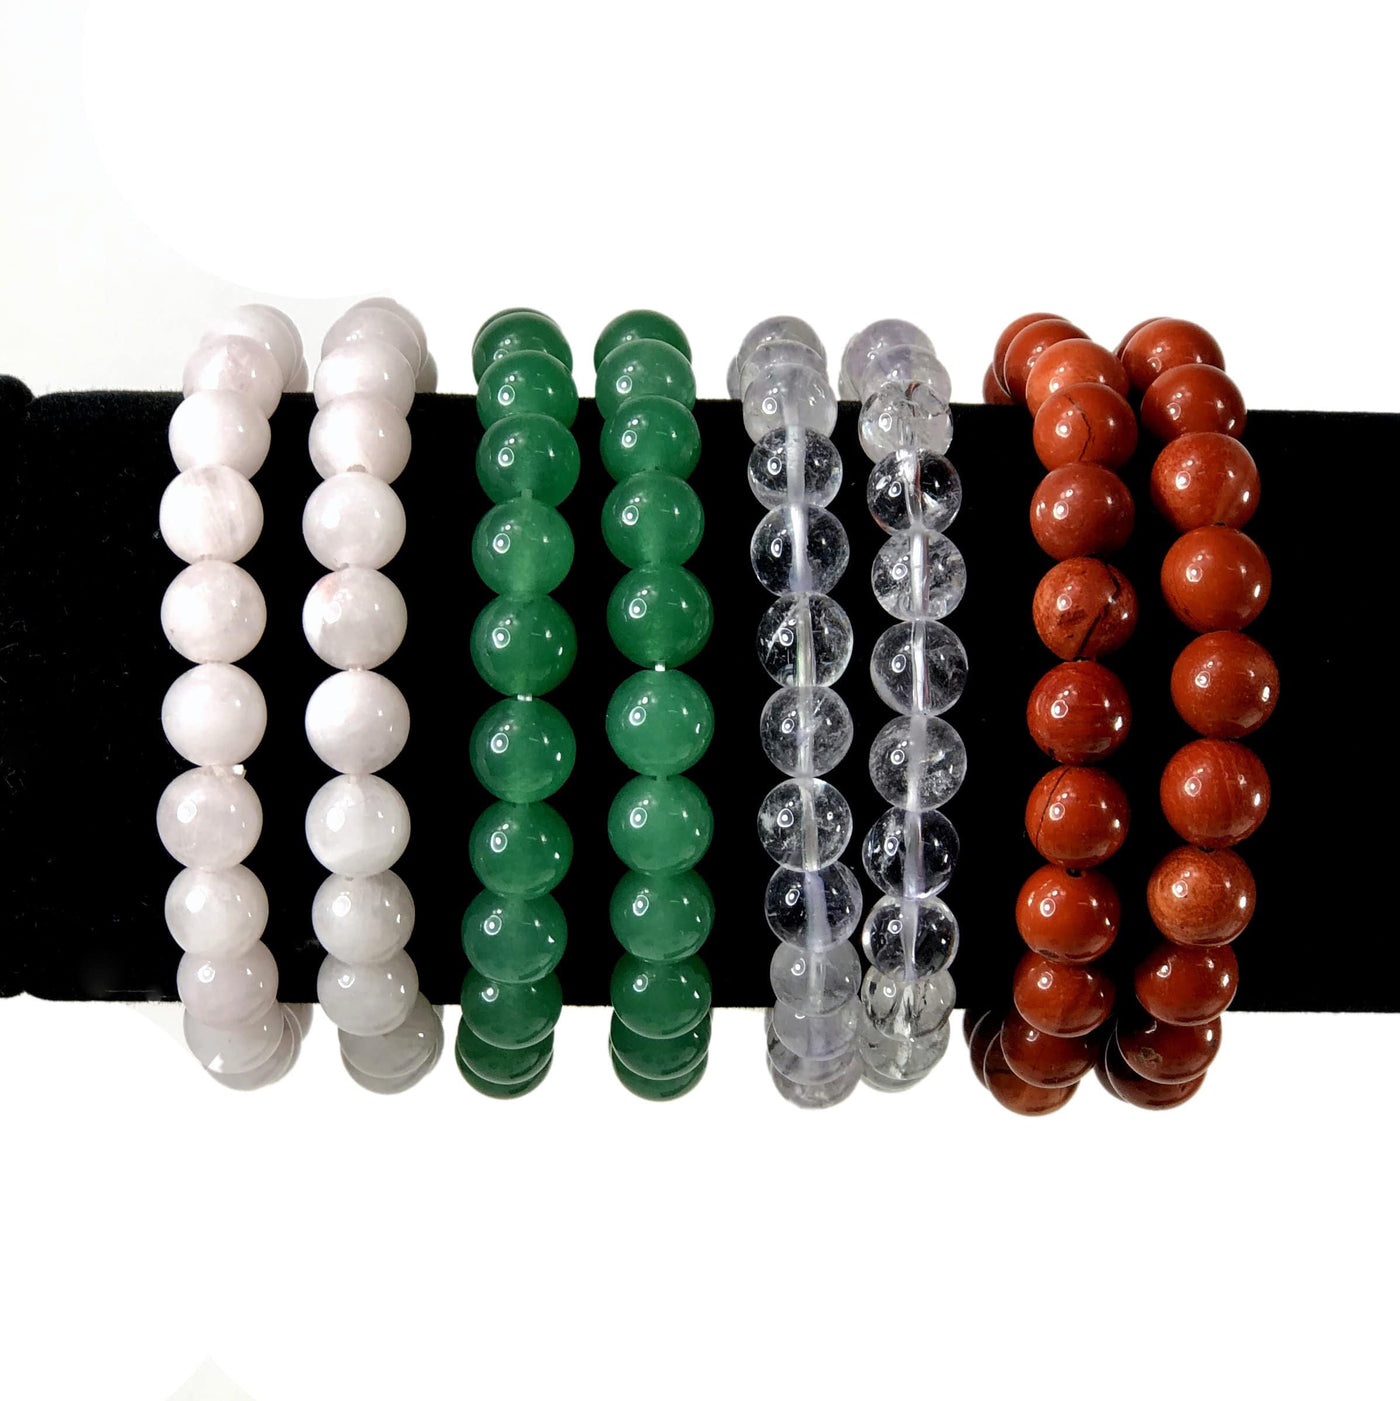 varied healing stone bracelets on a display stand with white background